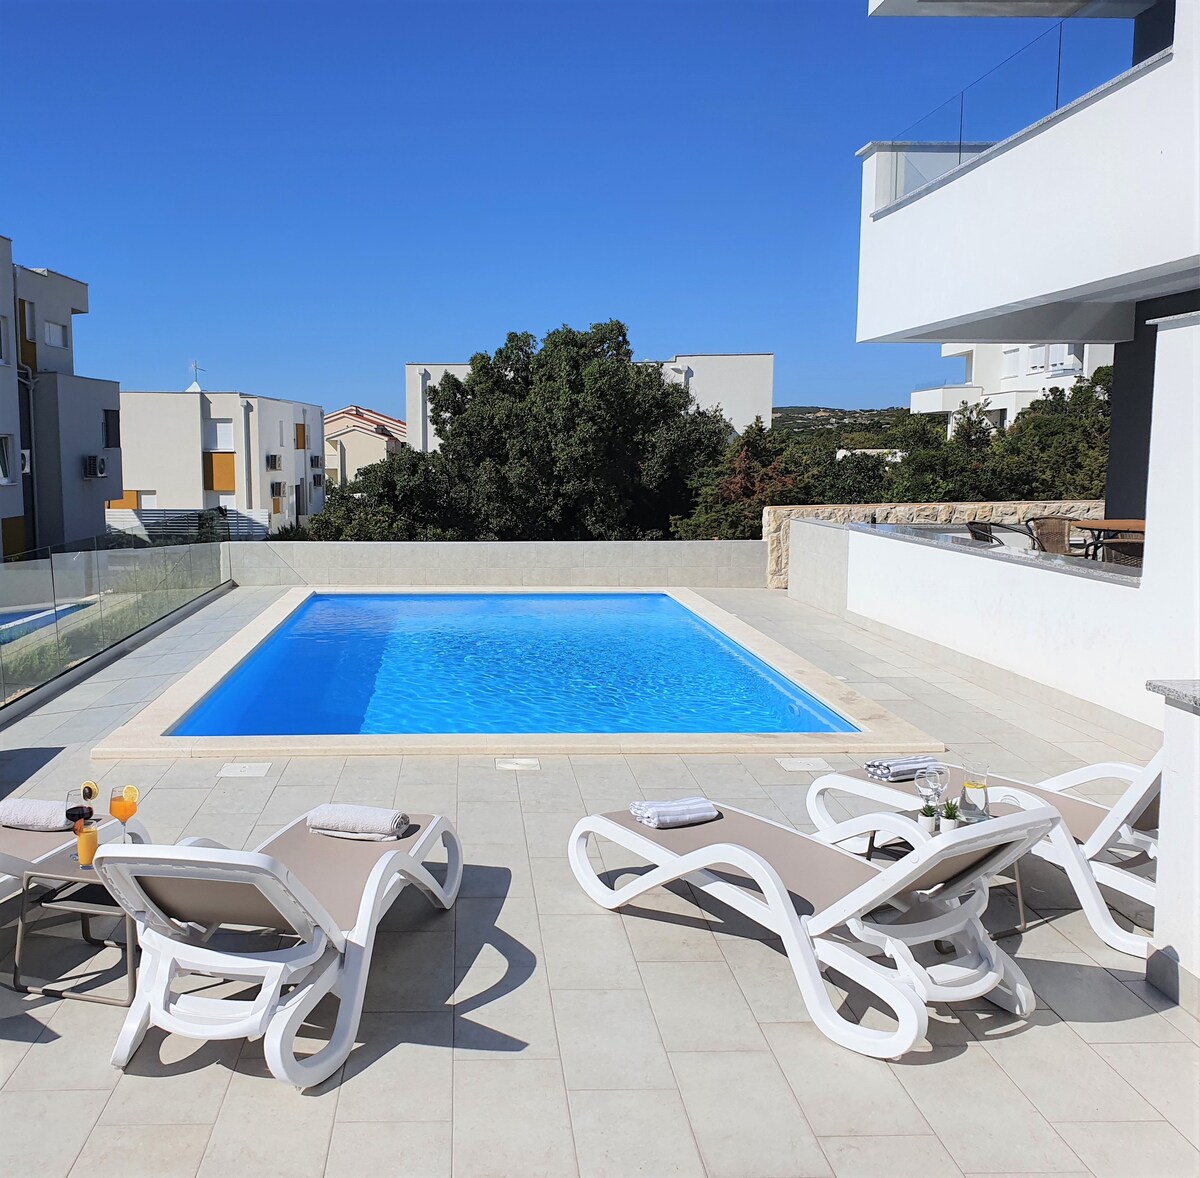 NEW! Turtle luxury apartment with pool & sea view